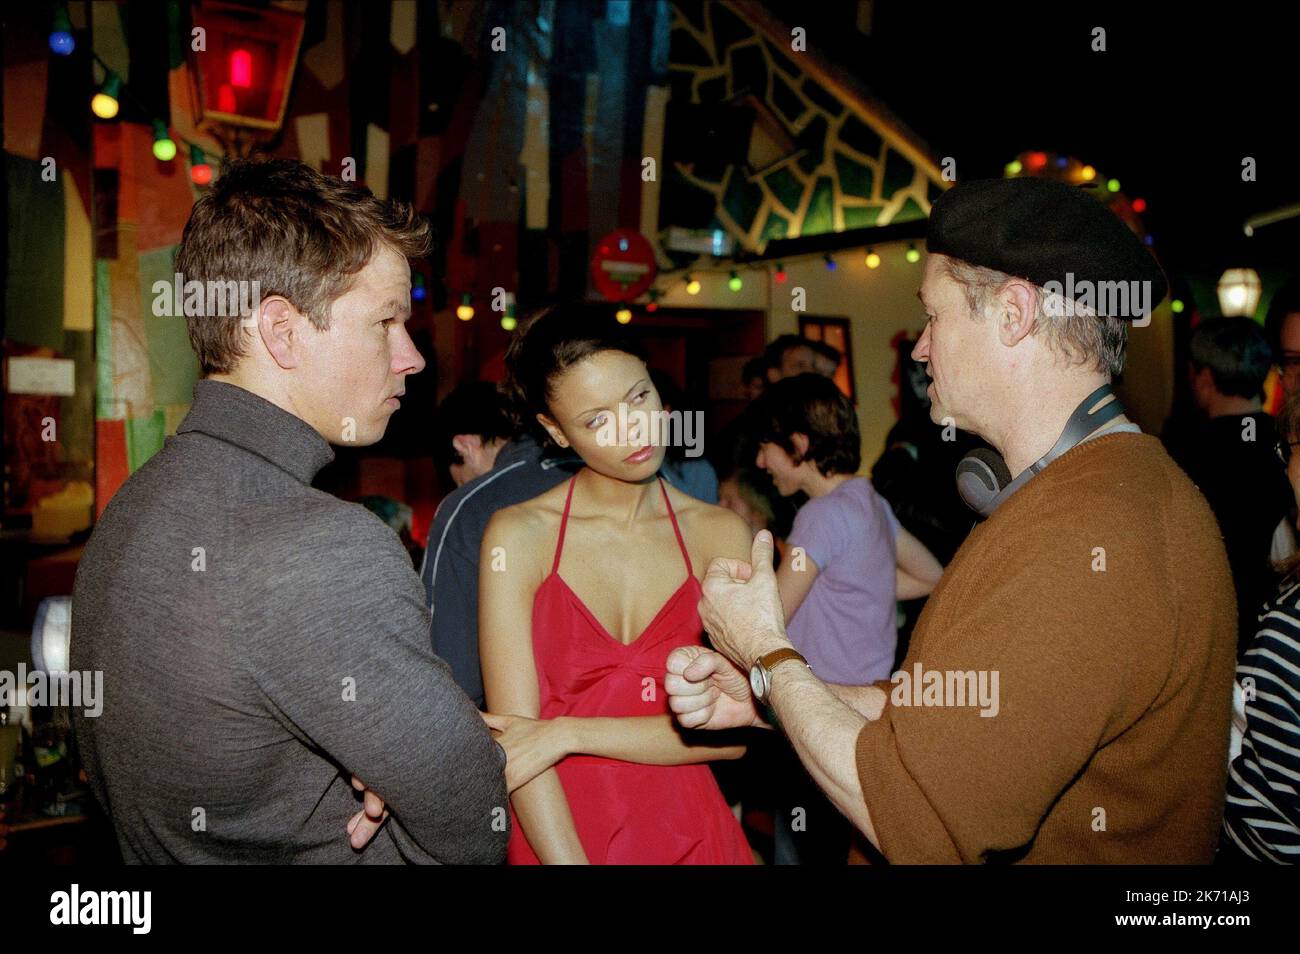 MARK WAHLBERG, THANDIE NEWTON, JONATHAN DEMME, THE TRUTH ABOUT CHARLIE, 2002 Stock Photo